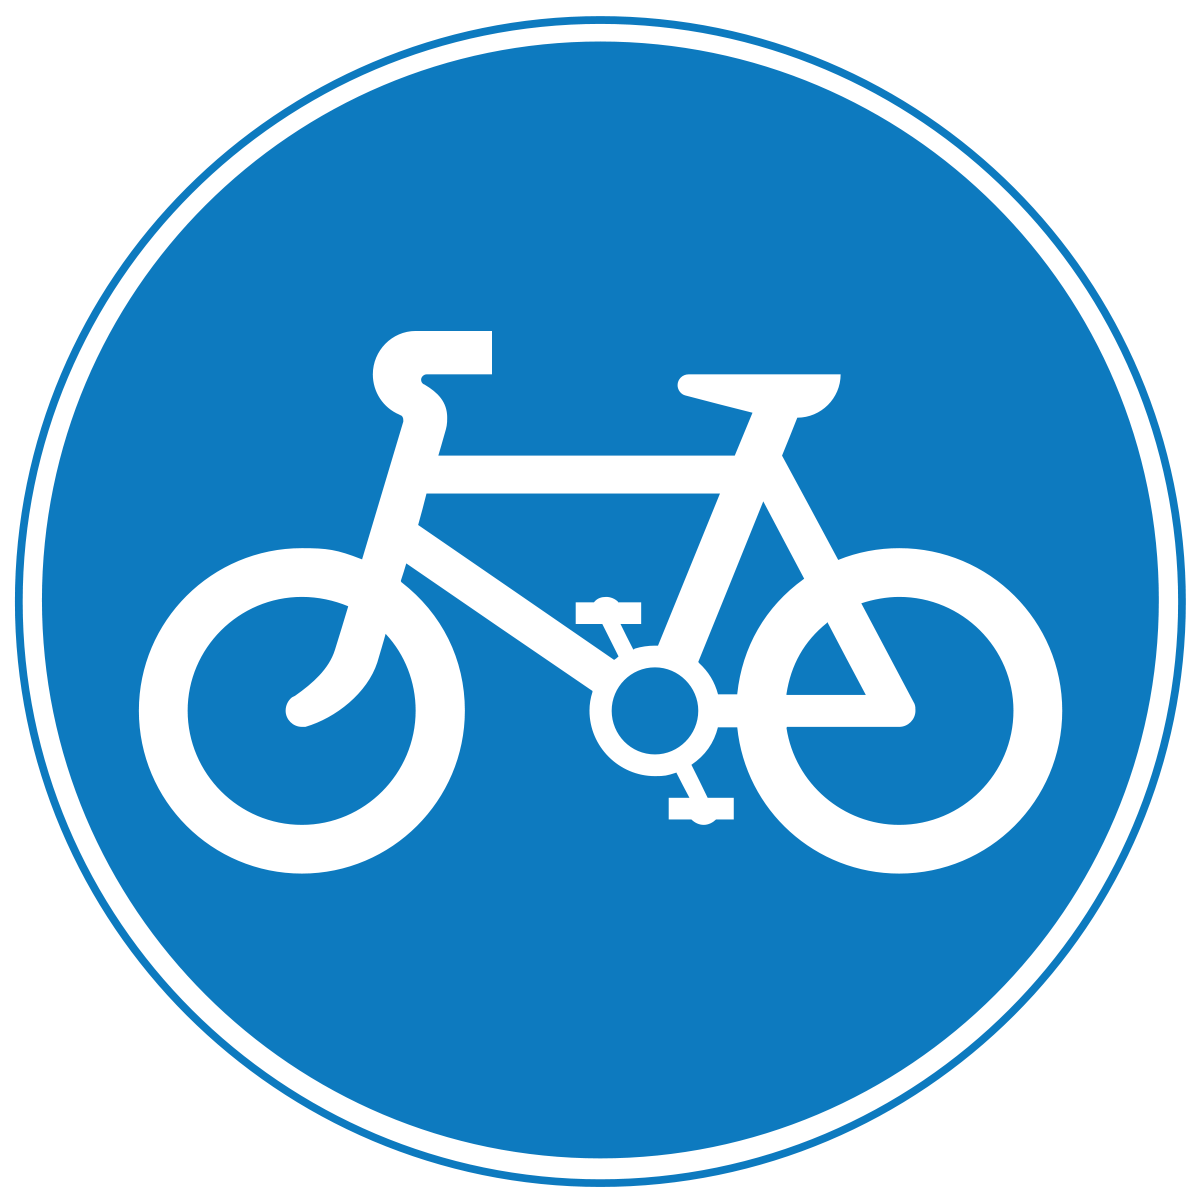 Route to be used by pedal cycles only